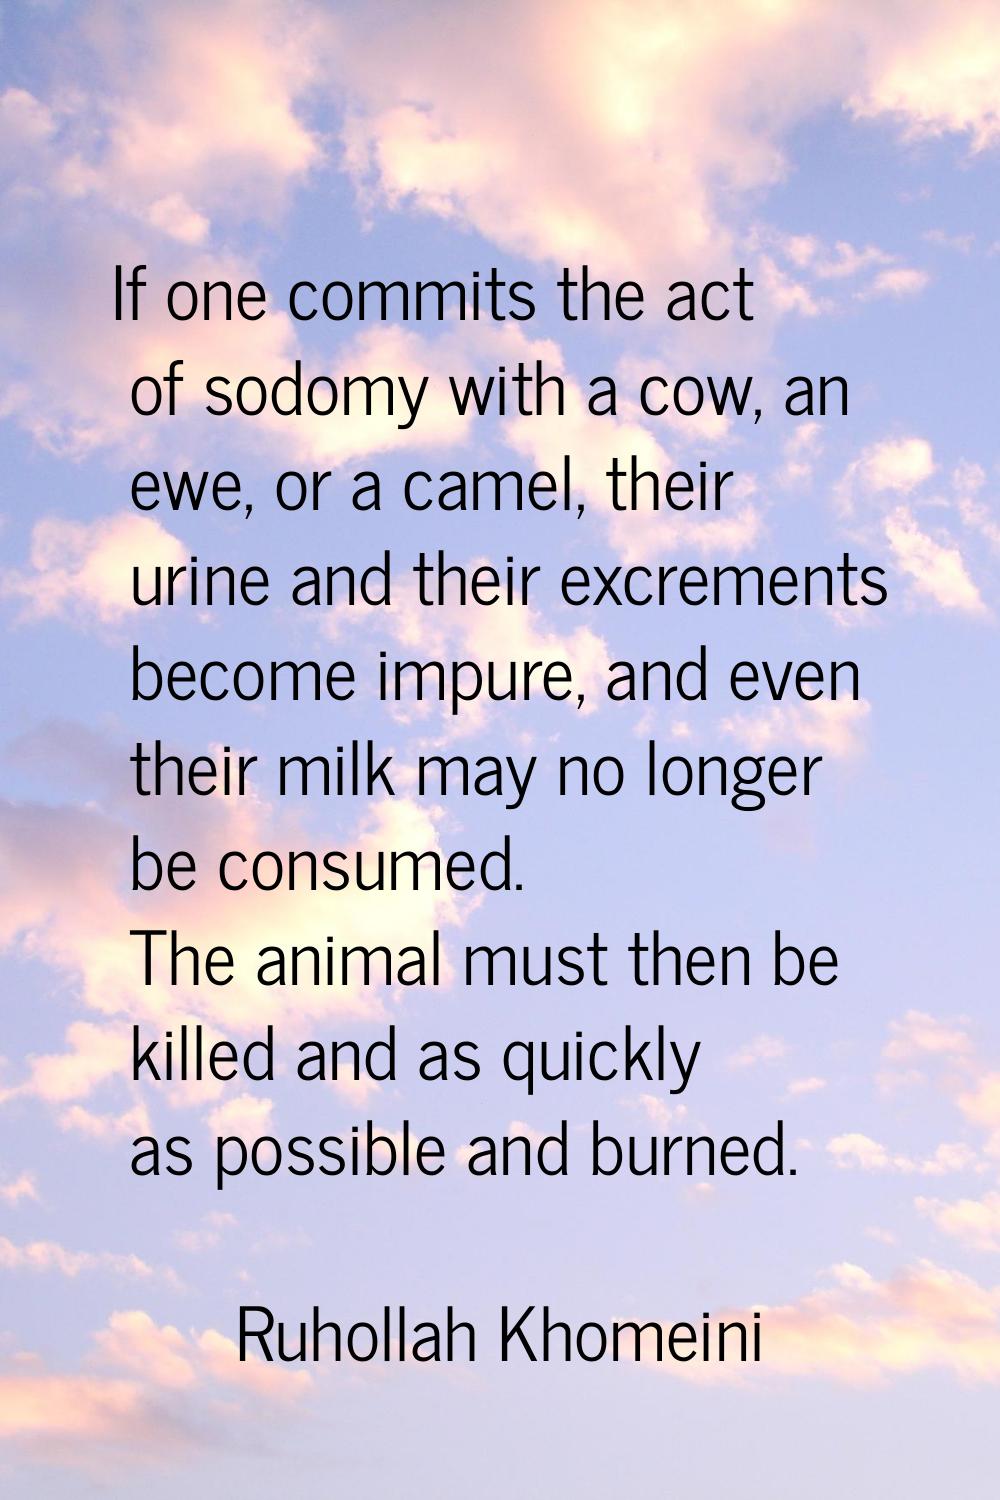 If one commits the act of sodomy with a cow, an ewe, or a camel, their urine and their excrements b